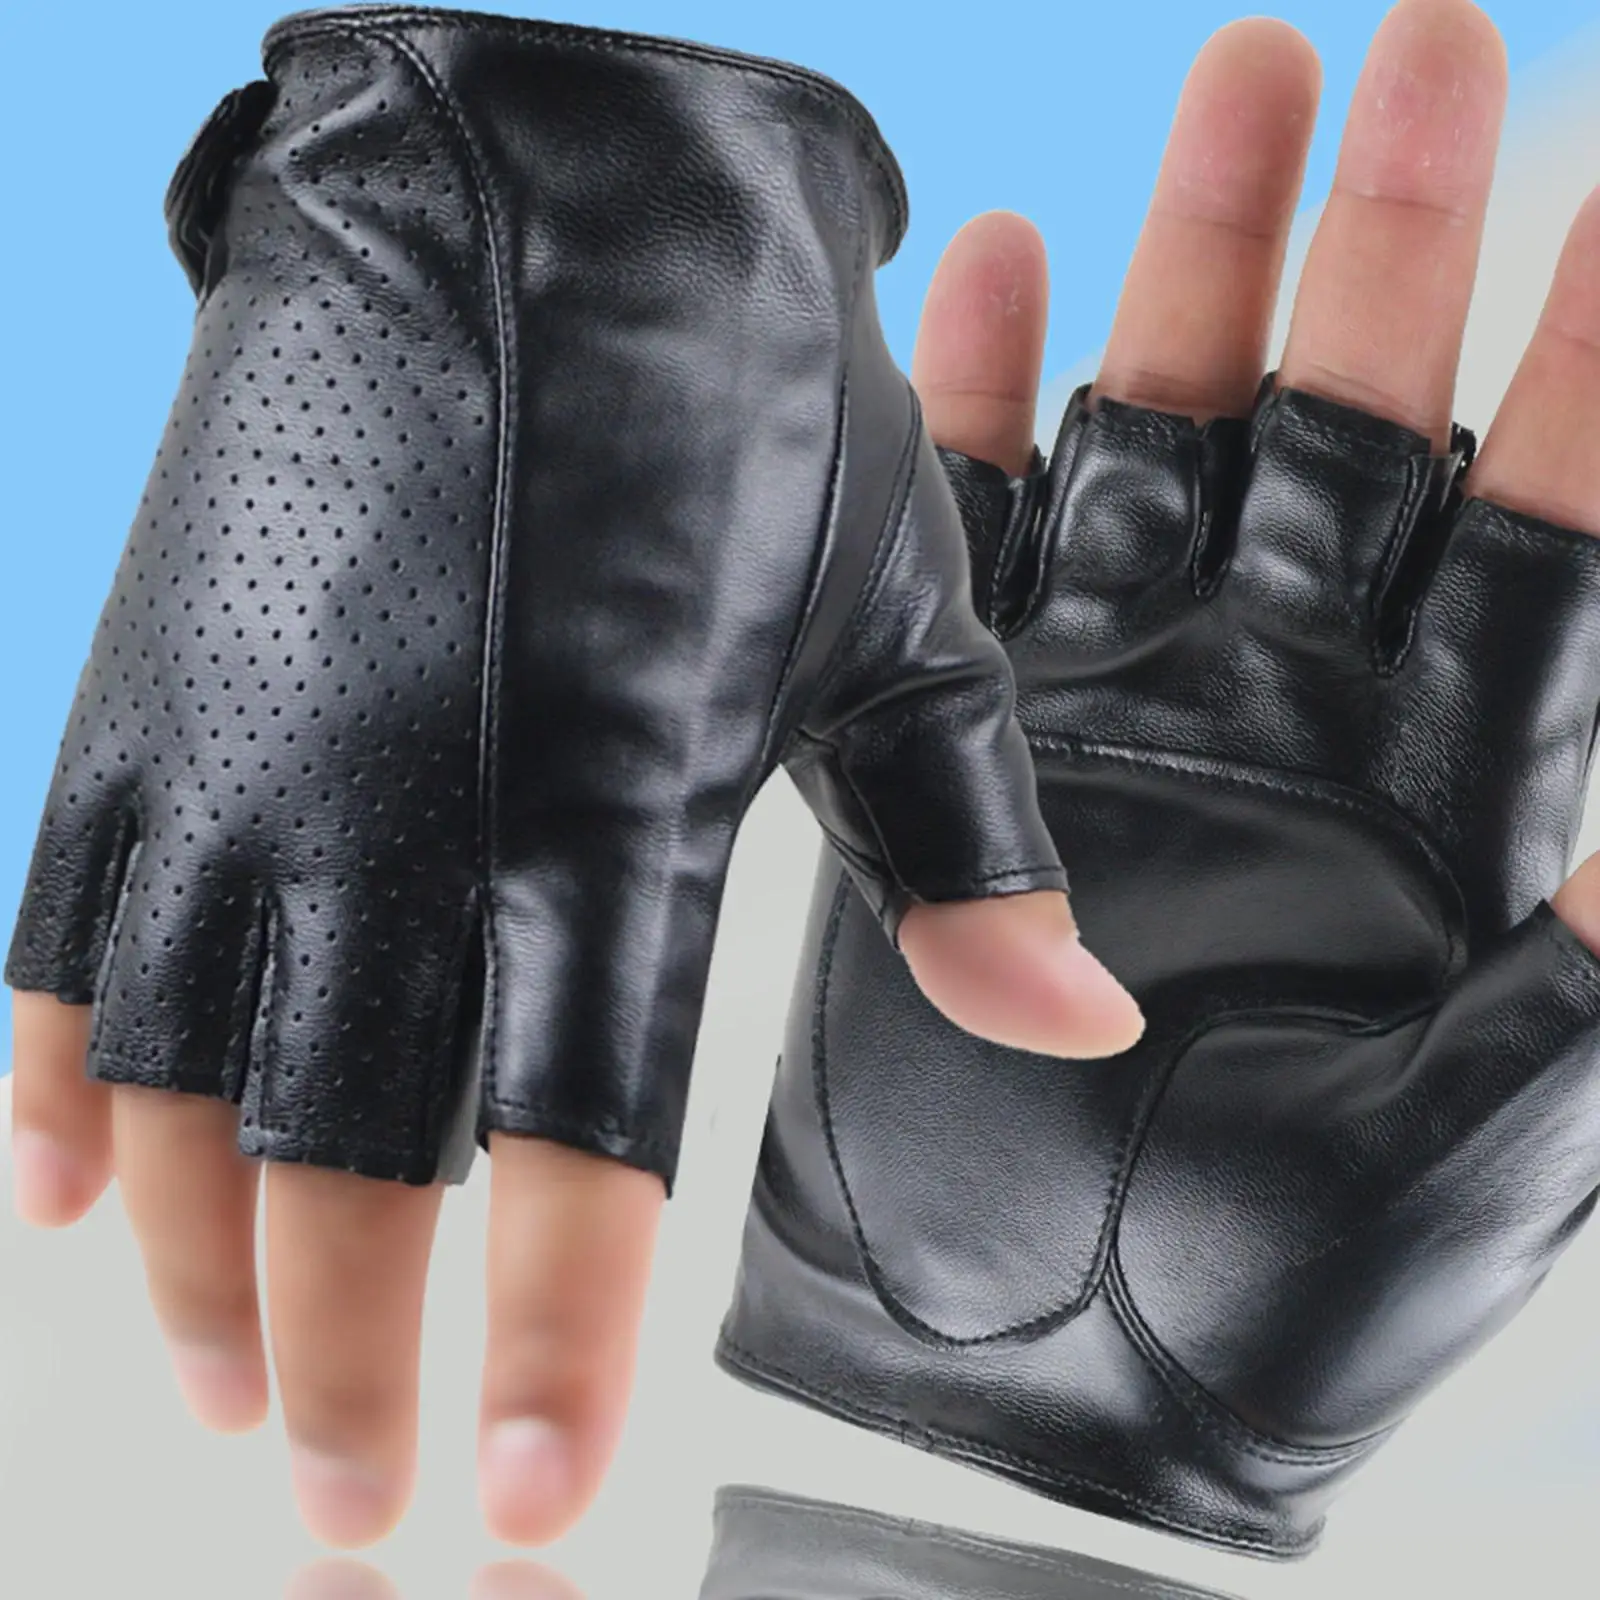  Half Finger Driving Gloves Breathable Lightweight Non  Cycling Gloves Shockproof Gloves Mitts for Motorcycle Hiking Running